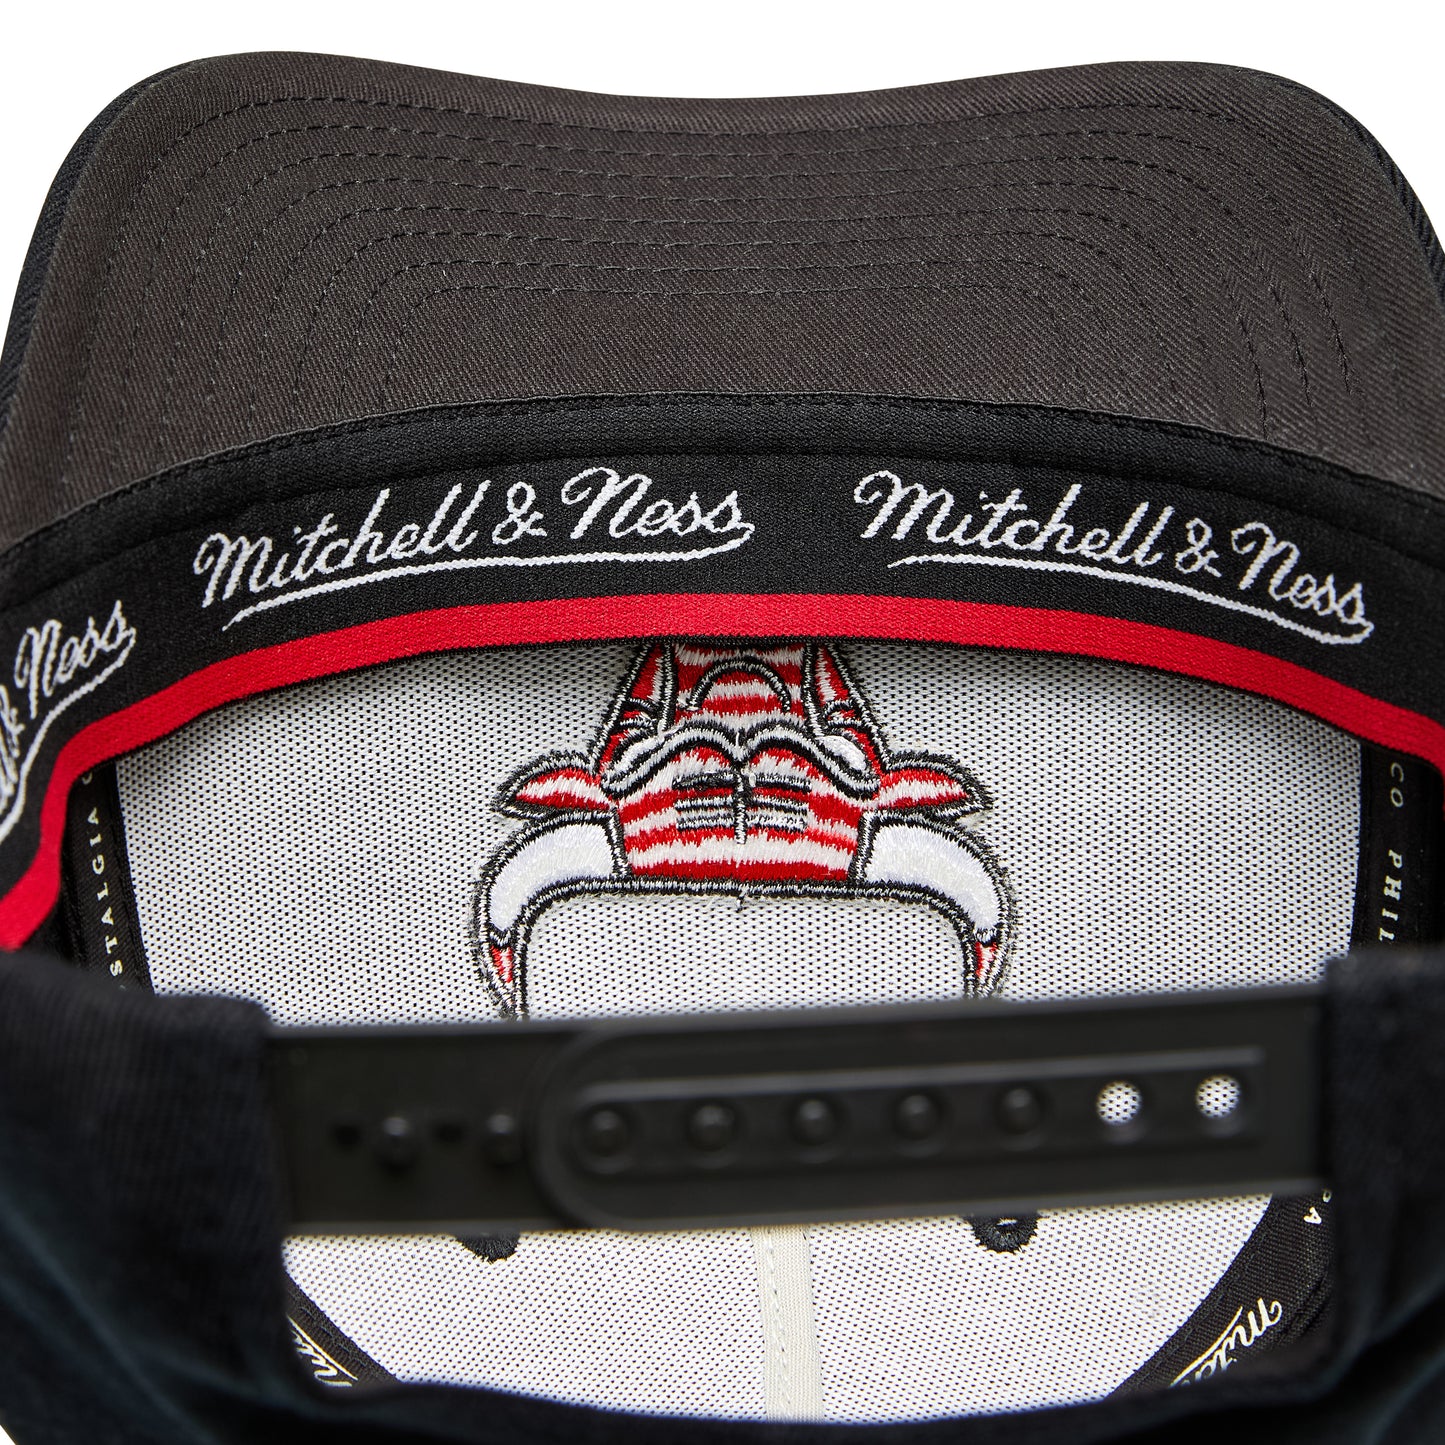 #Mitchell & Ness Chicago Bulls Classic Red Stretch Black/Red - F